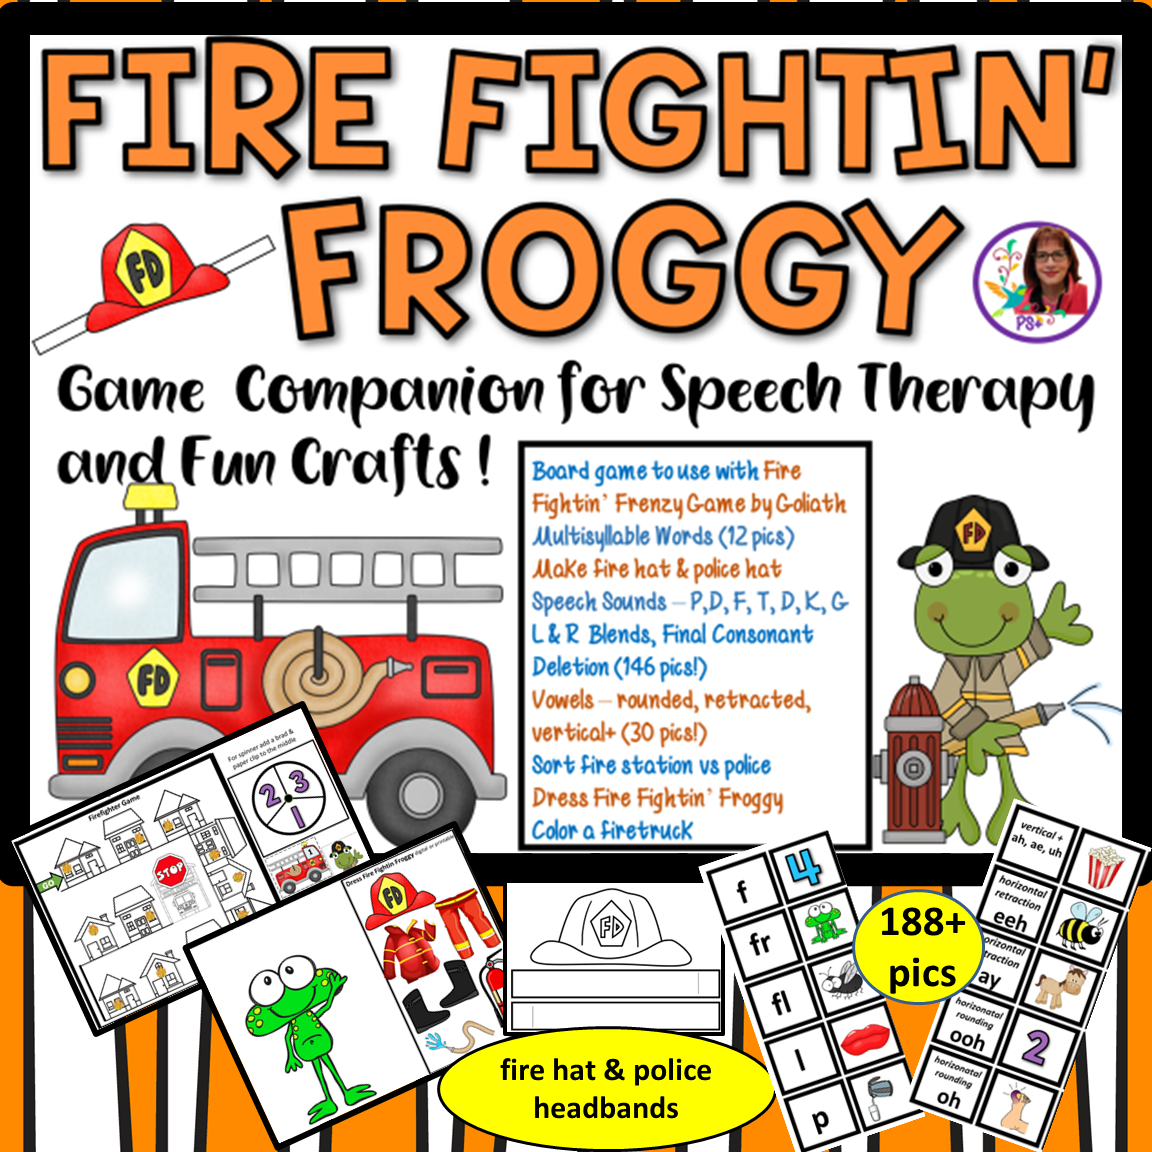 GAME COMPANION FOR FIRE FIGHTIN FRENZY (Copy)